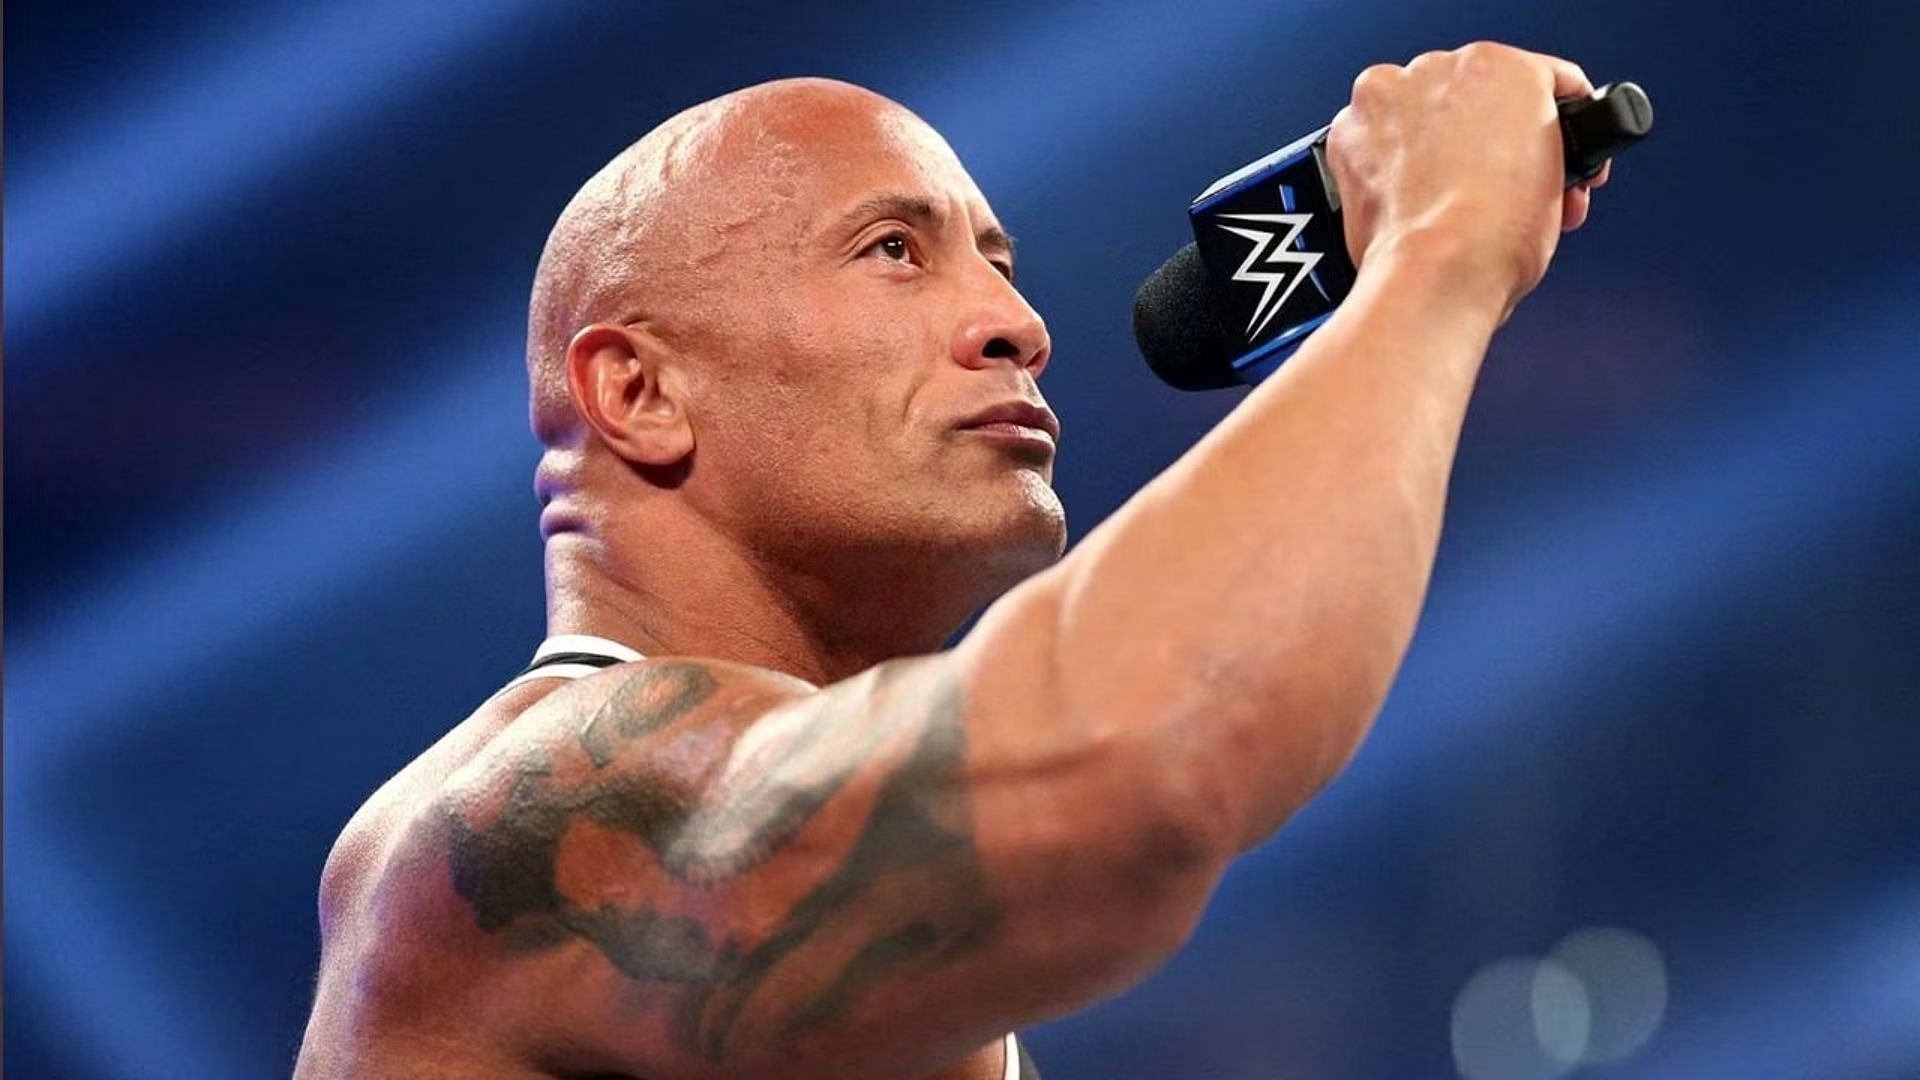 The Rock is one of WWE